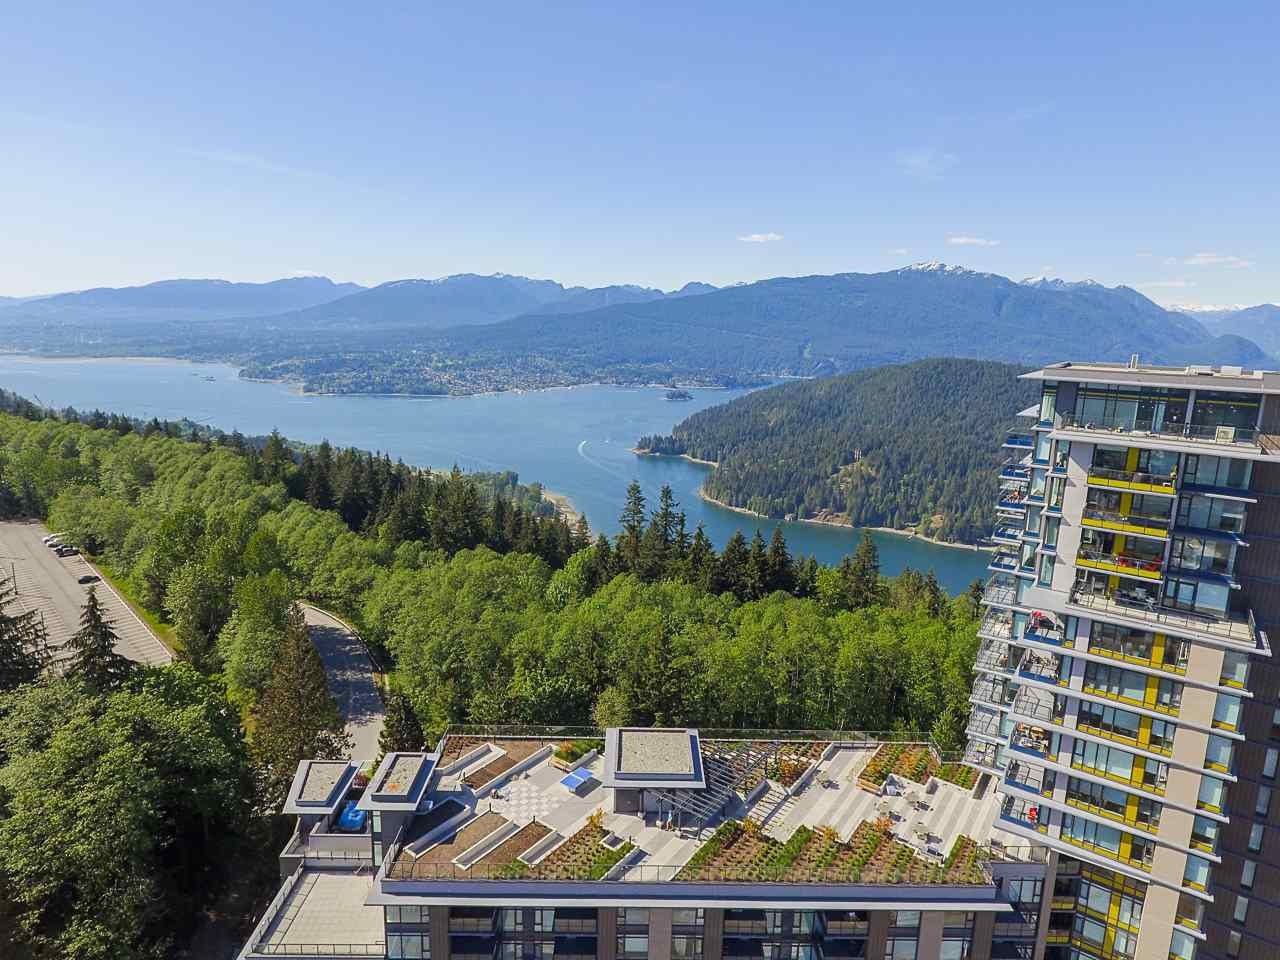 Main Photo: 1507 8850 UNIVERSITY CRESCENT in Burnaby: Simon Fraser Univer. Condo for sale (Burnaby North)  : MLS®# R2416972